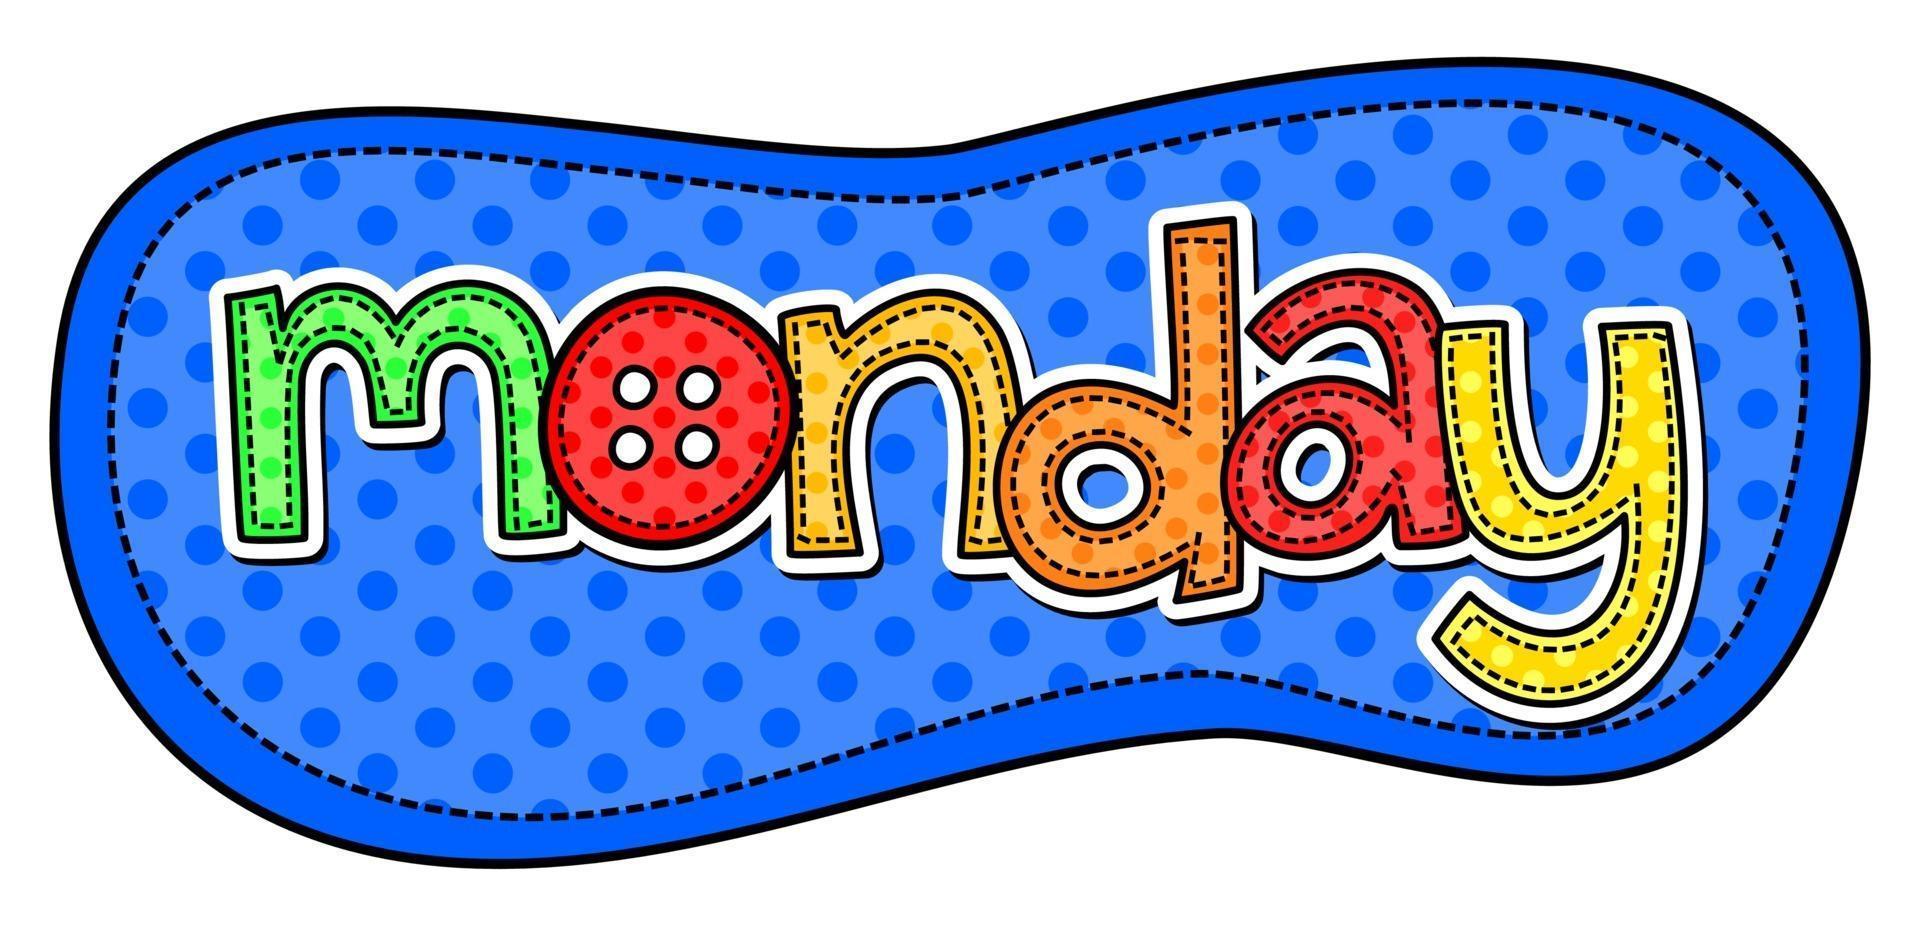 Monday Week Day Doodle Stitch Text Lettering Patch vector